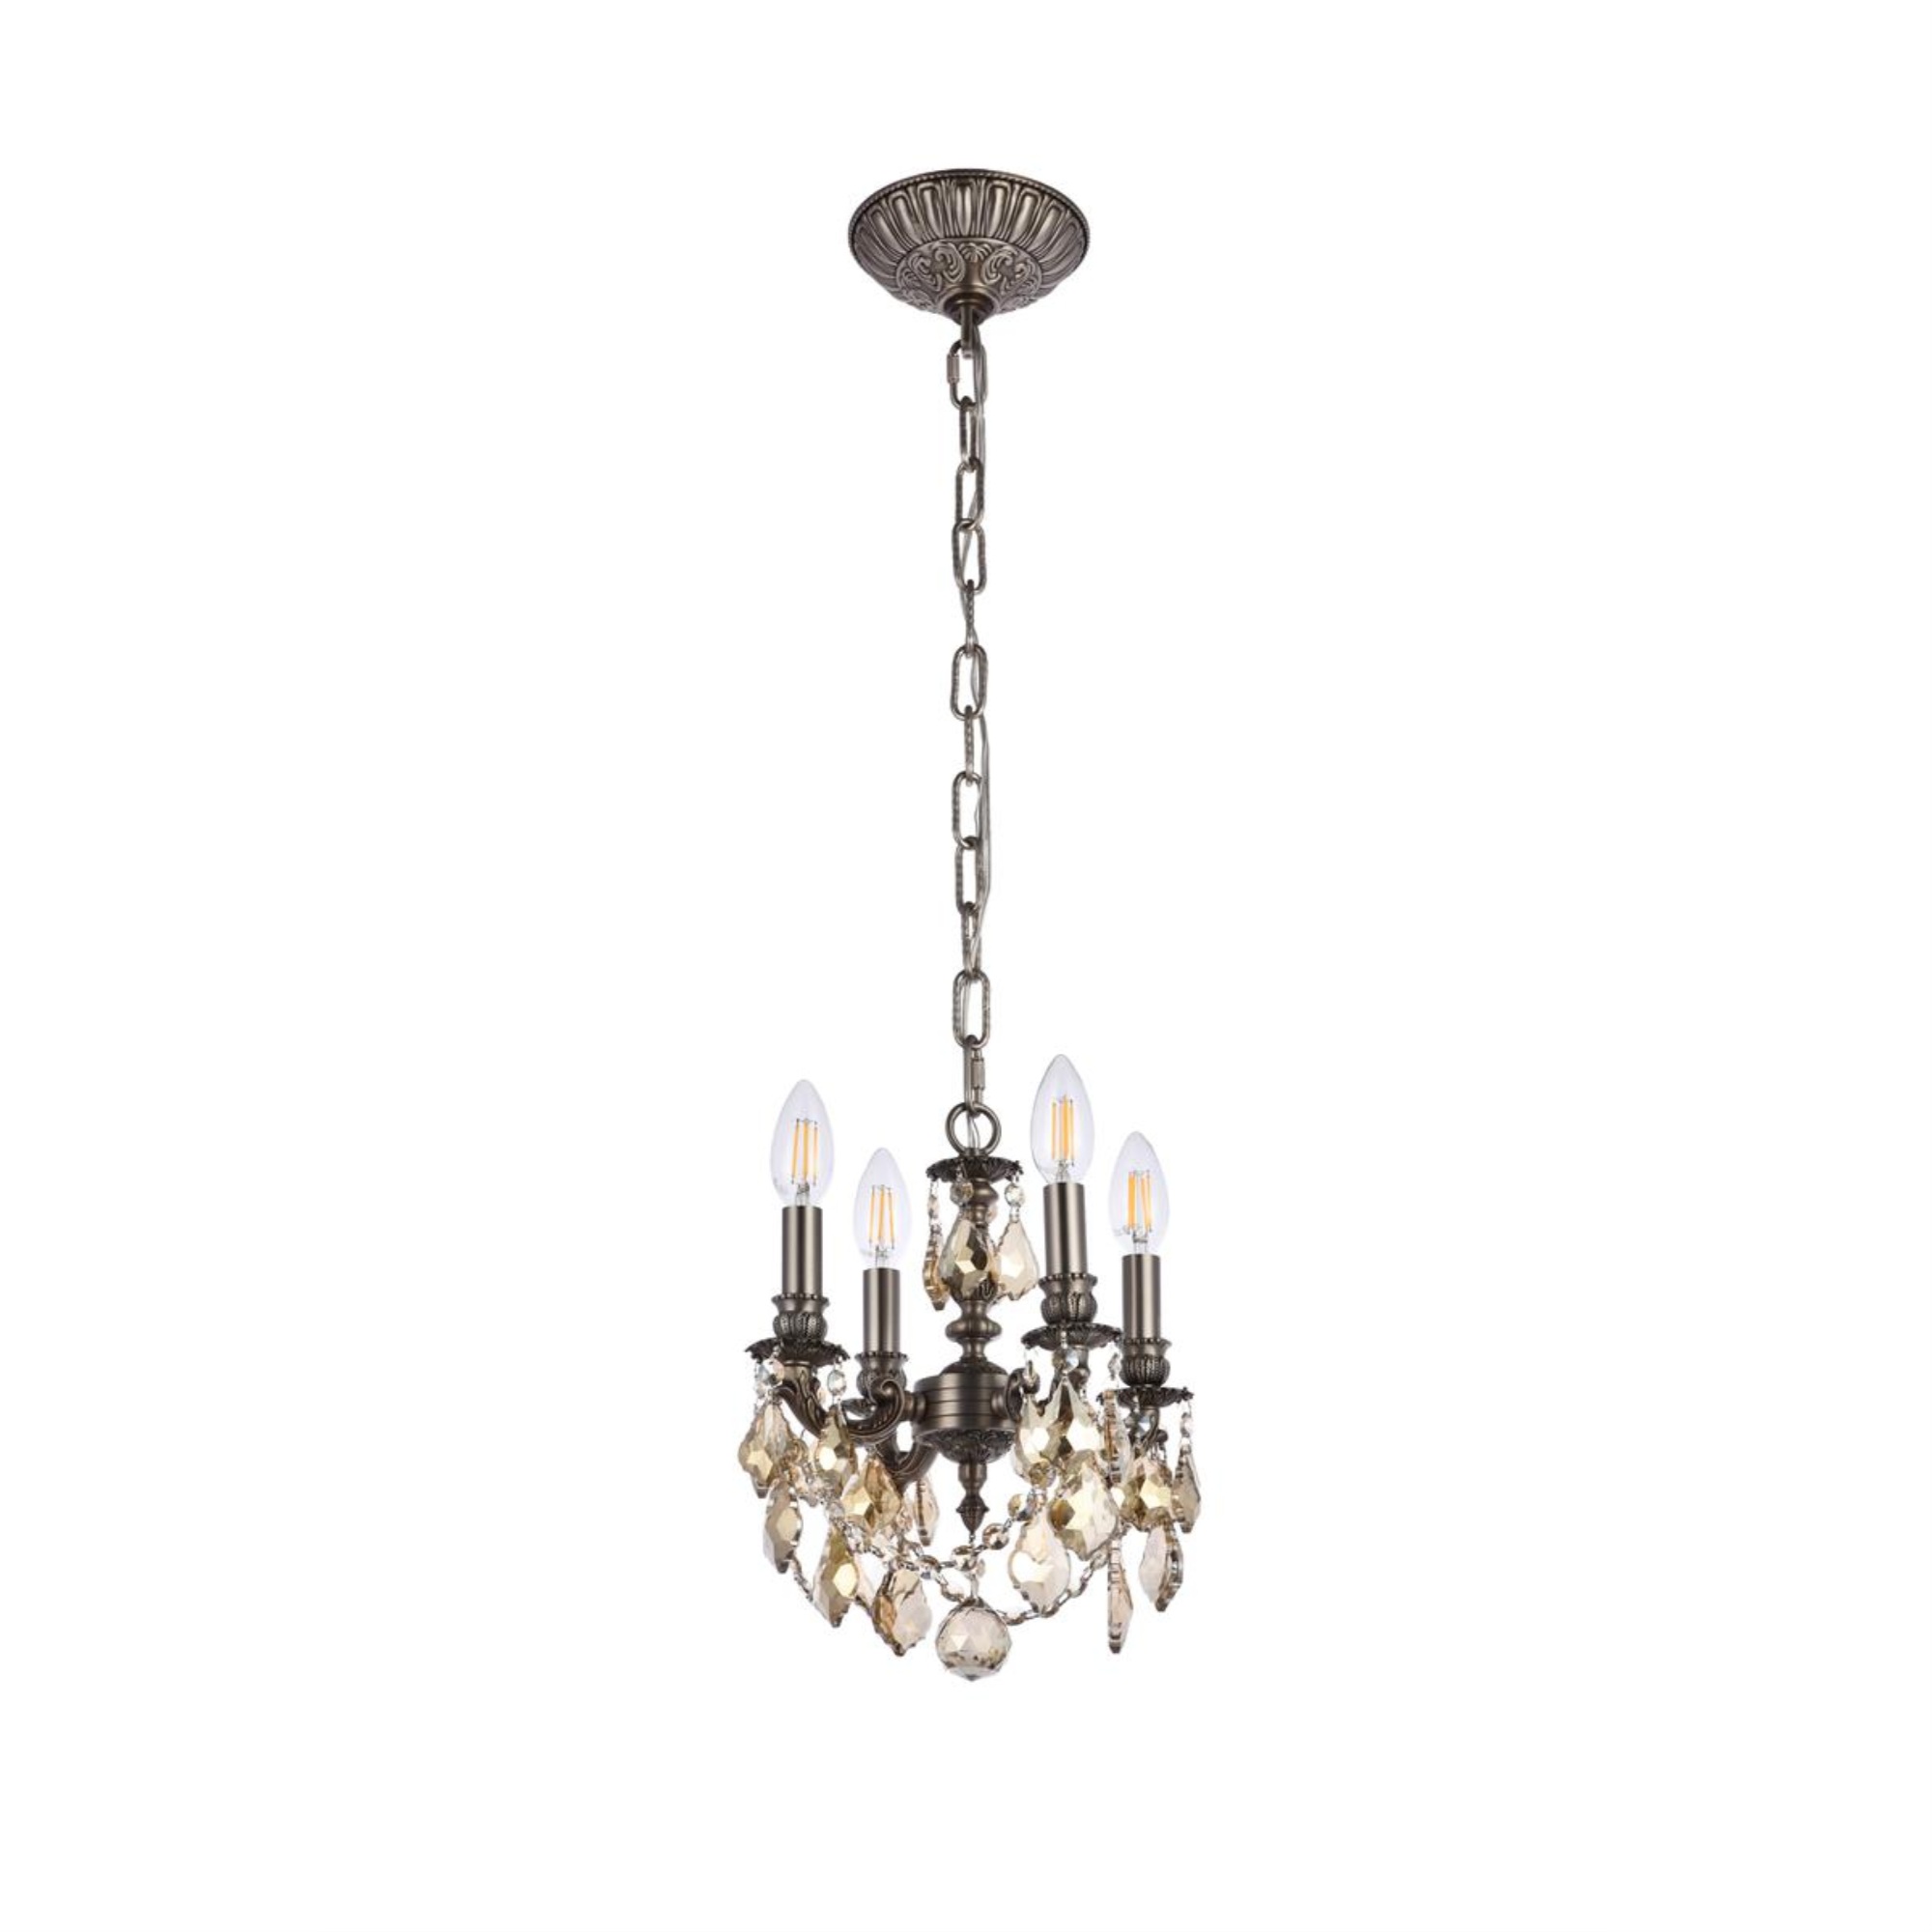 Elegant Lighting 9104 Lillie Collection Pendant D:10in H:10in Lt:4 Pewter Finish (Royal Cut Crystals)